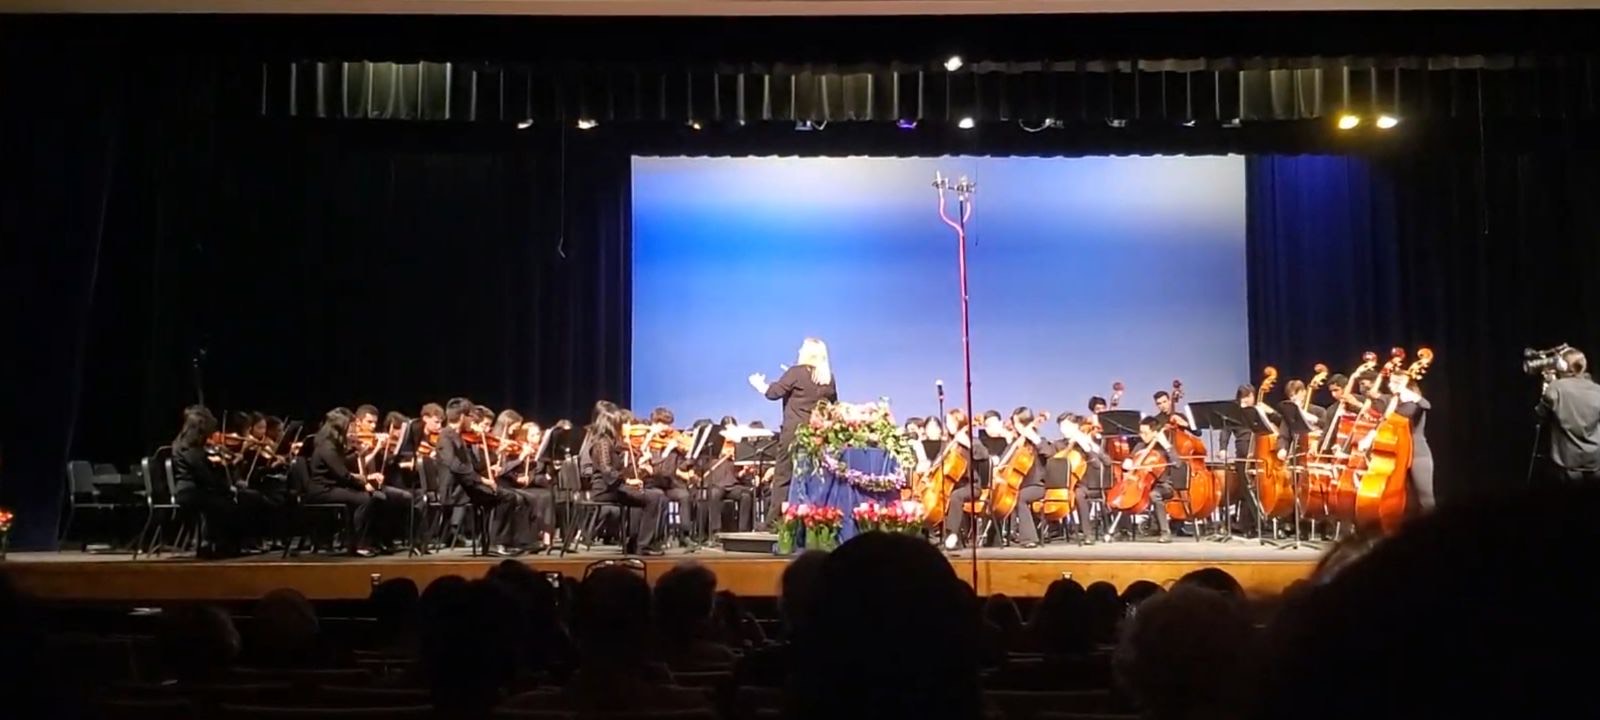 Music teacher Carolyn Herman conducts the orchestra as they play during the spring concert.